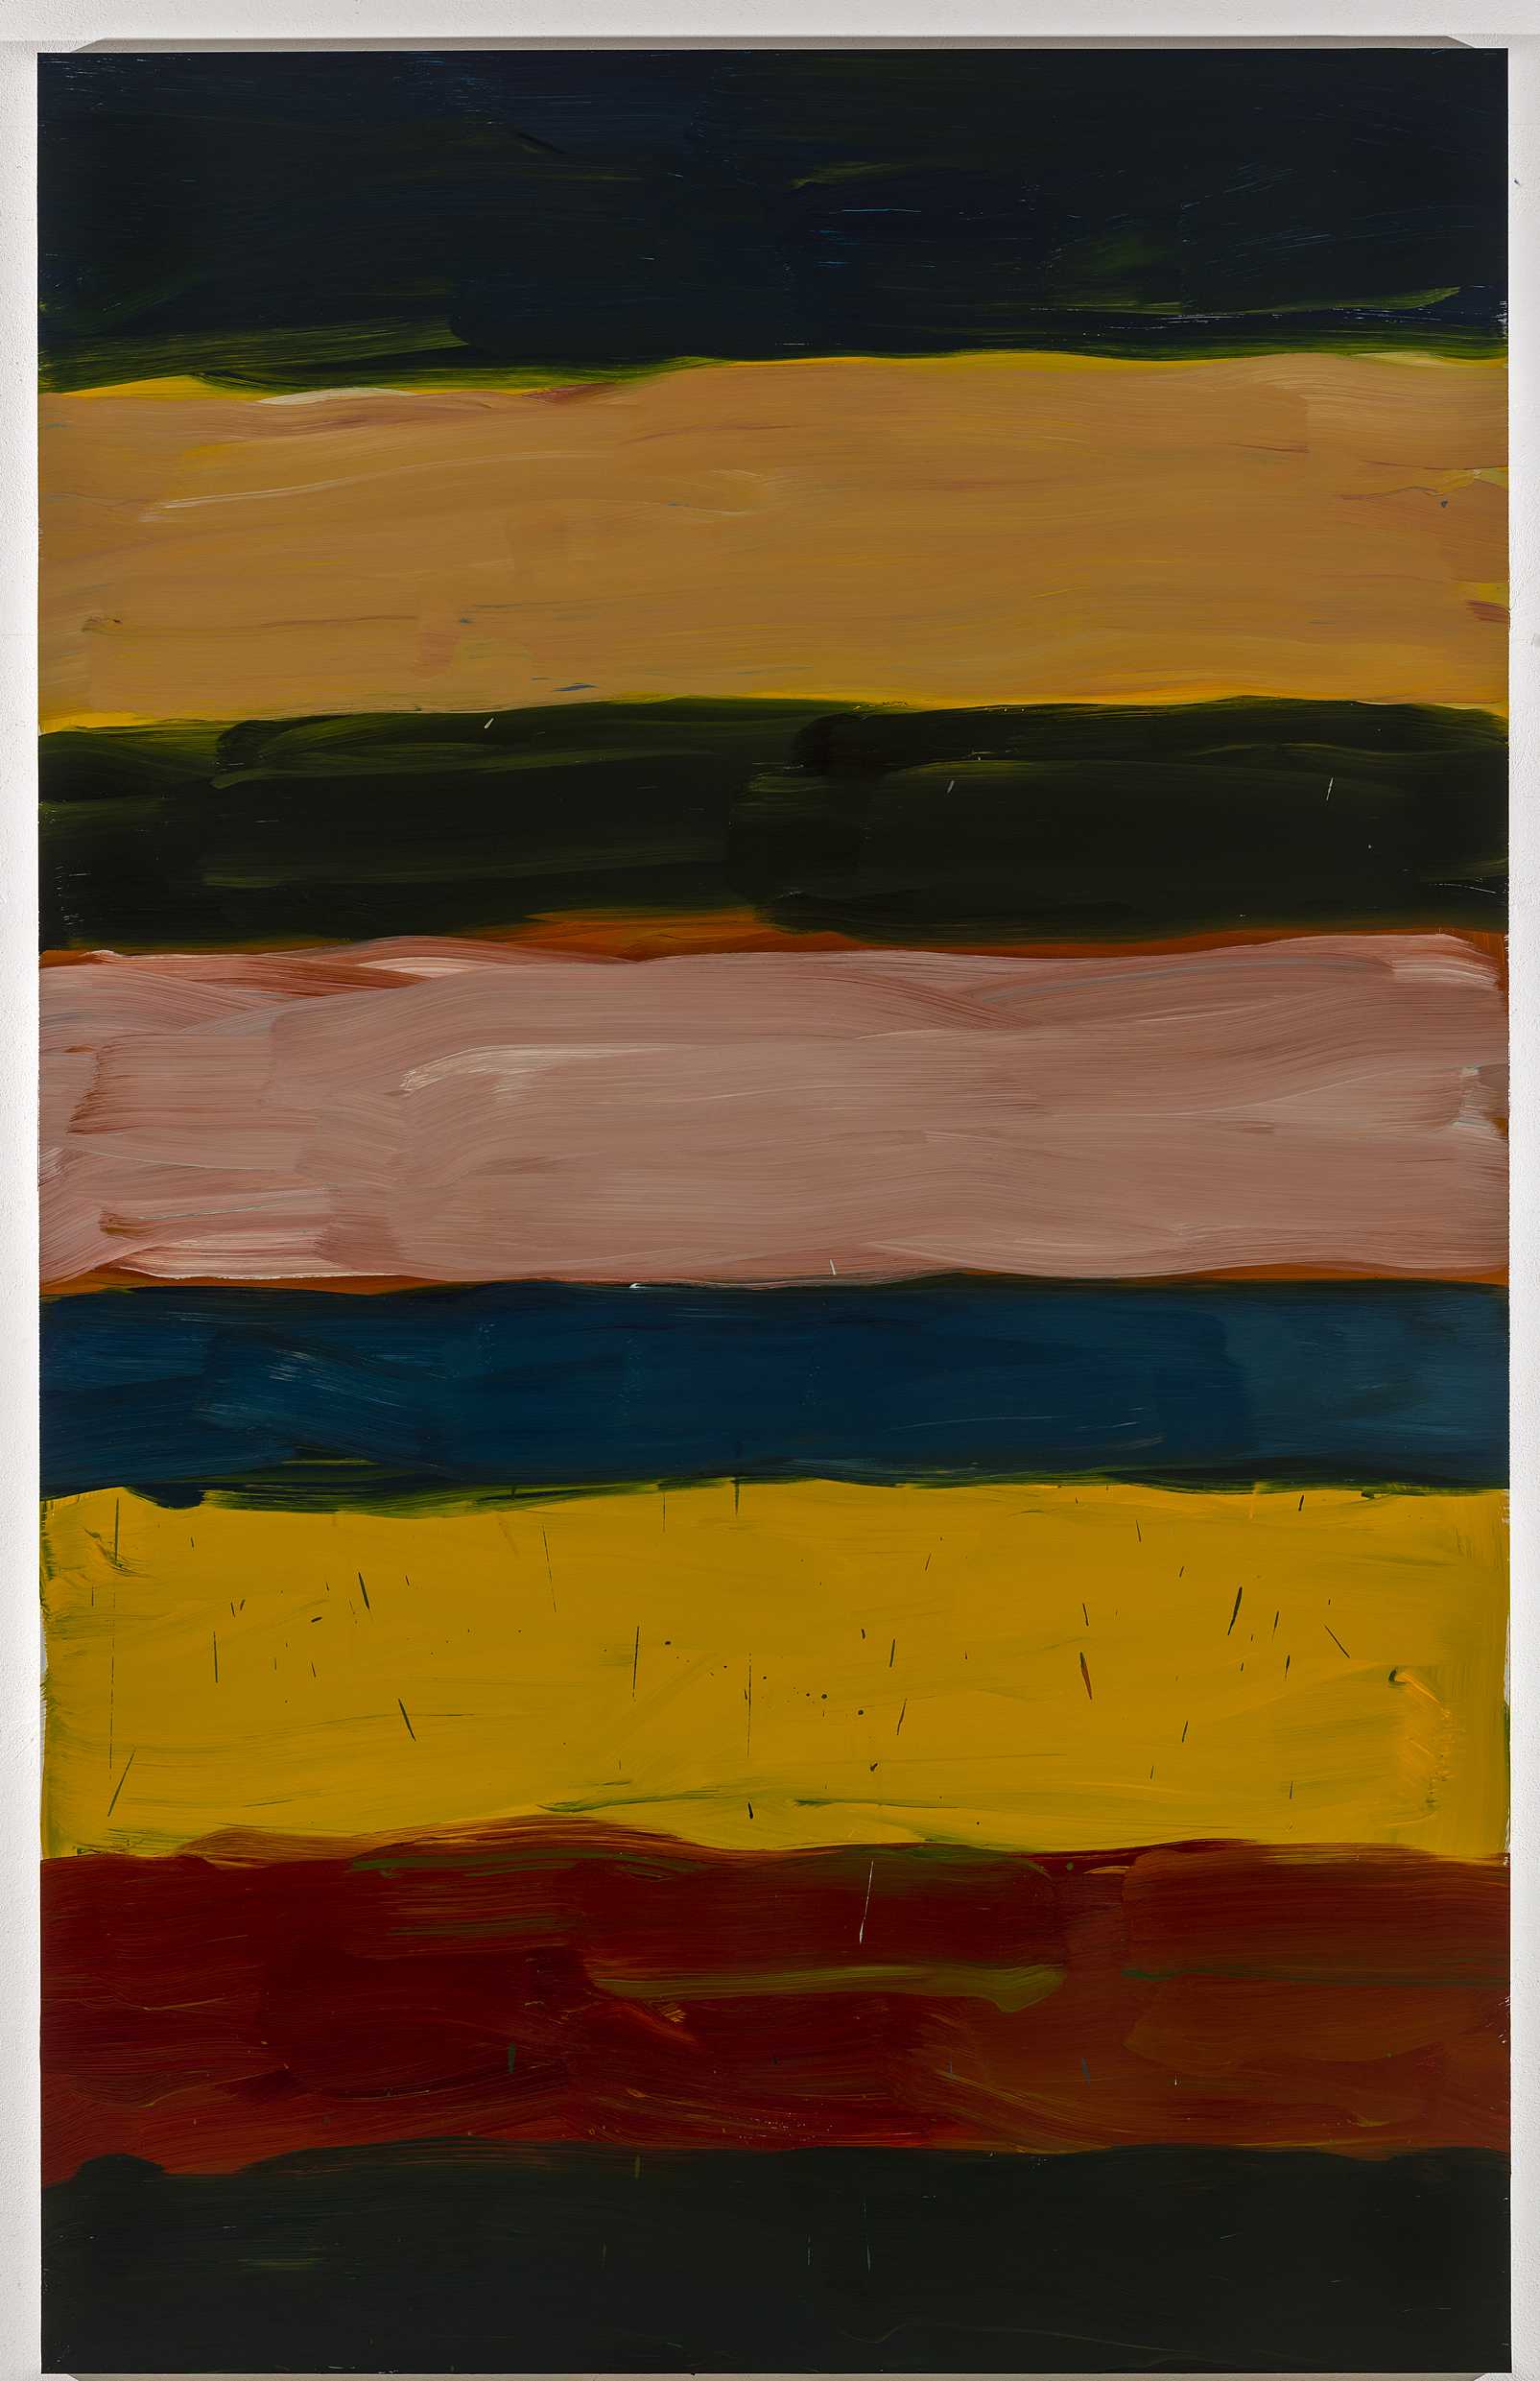 Sea Star: Sean Scully, Exhibition, National Gallery, London: 13 April 2019 – 11 August 2019